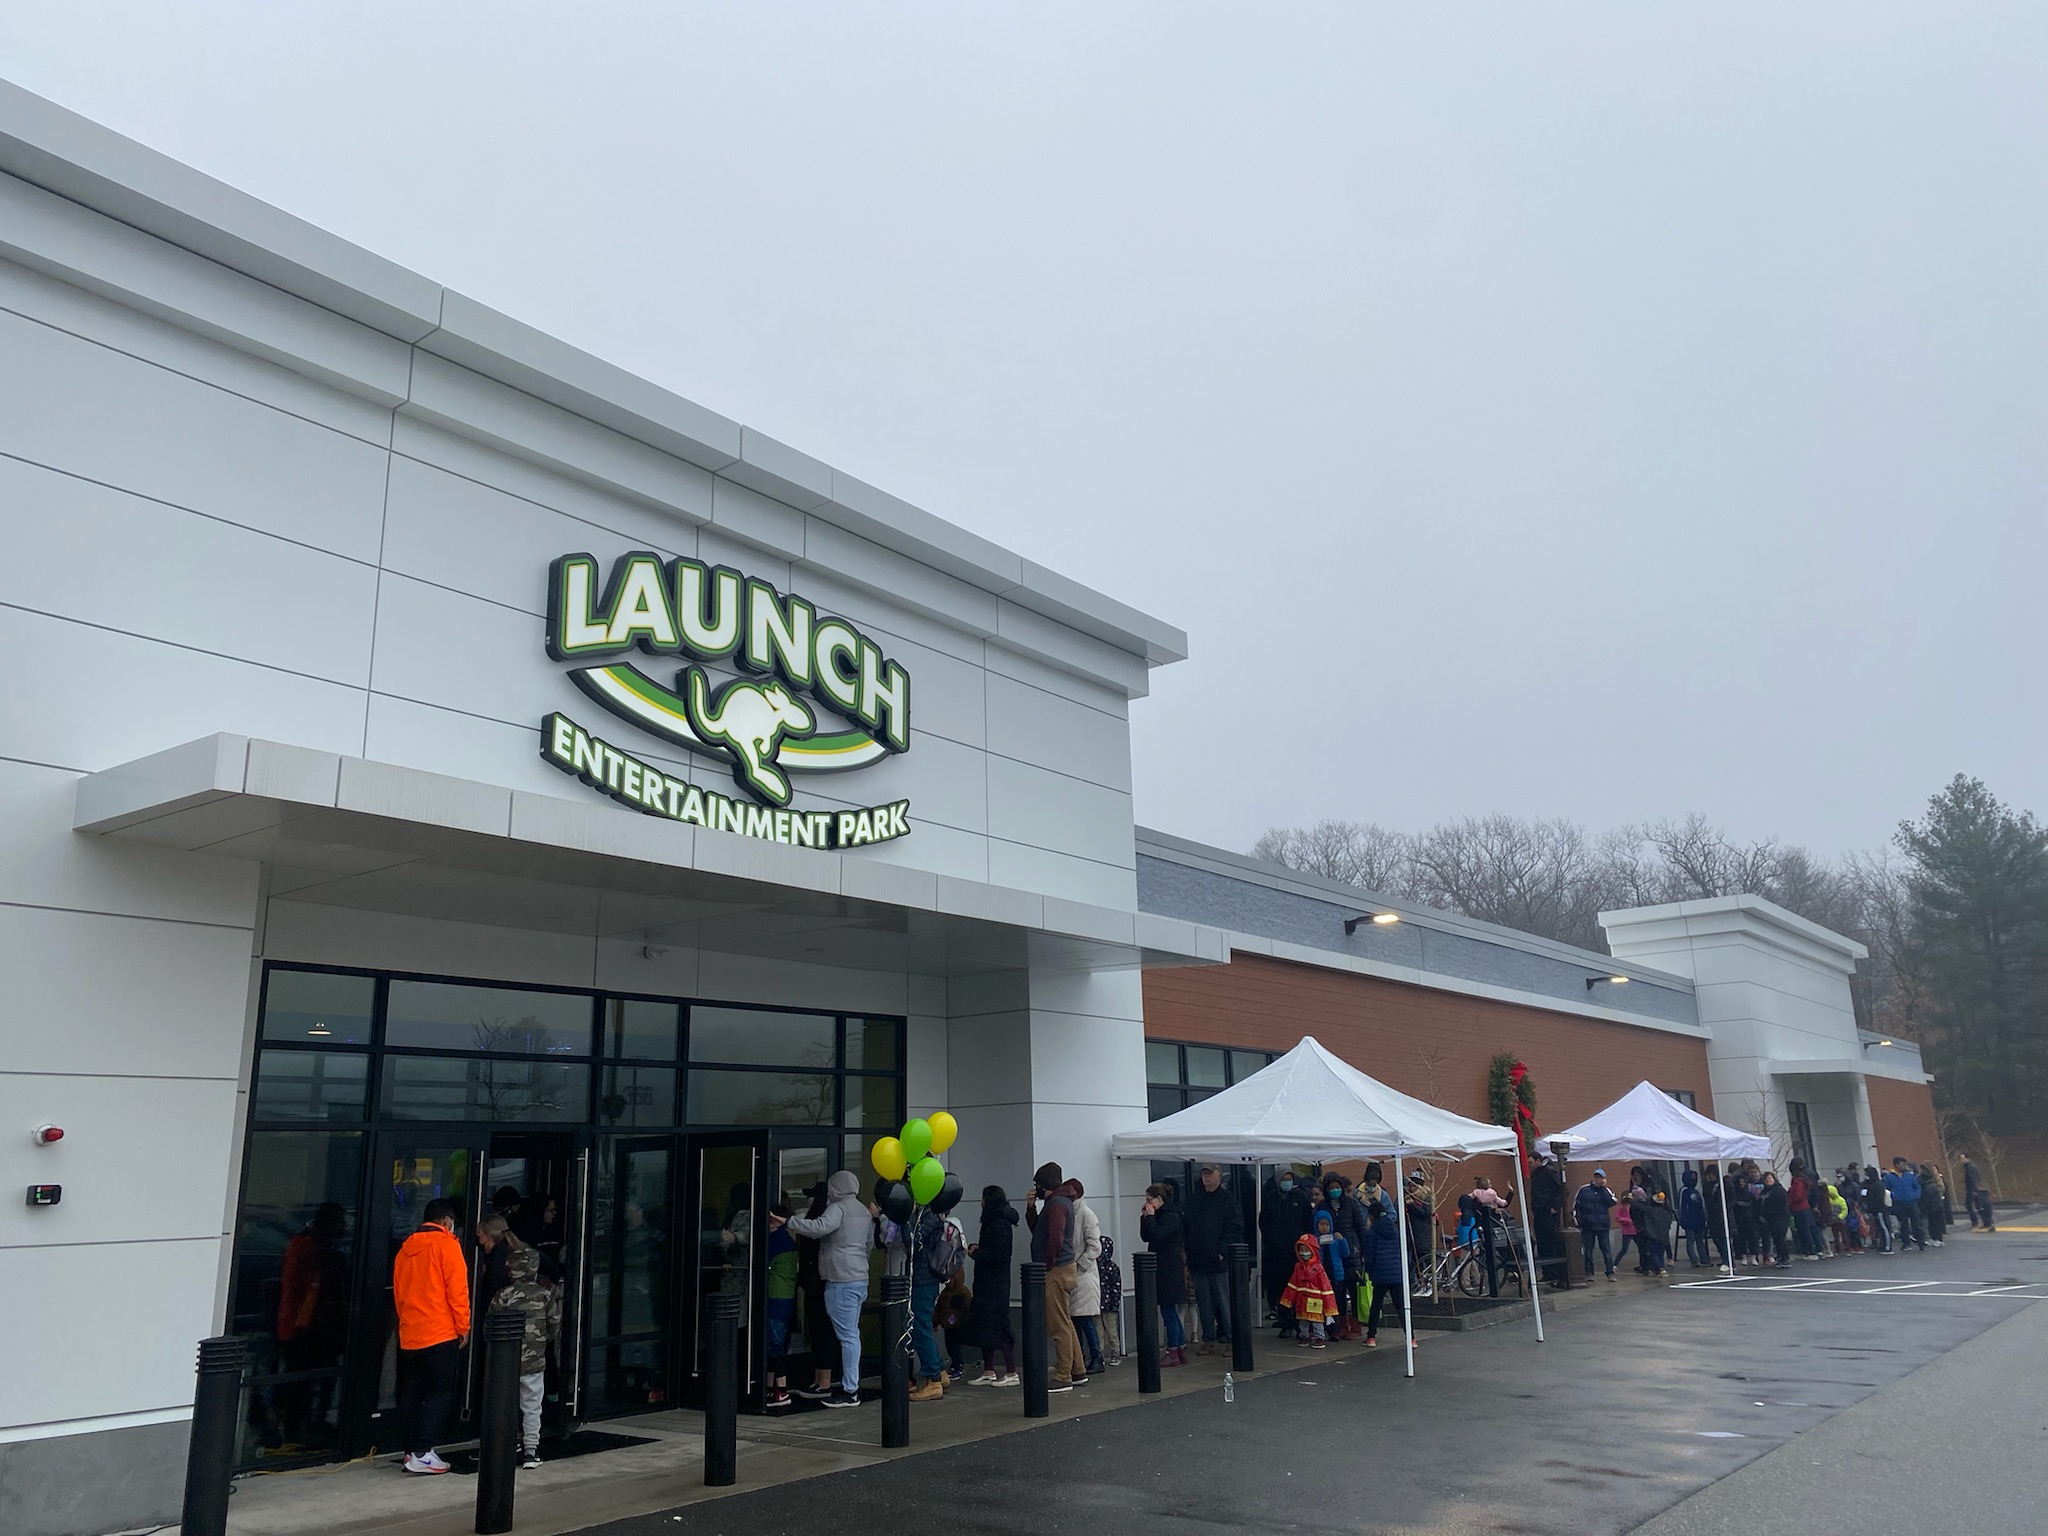 Launch Brings its One-of-a-Kind Family Entertainment Center to Woburn, Massachusetts